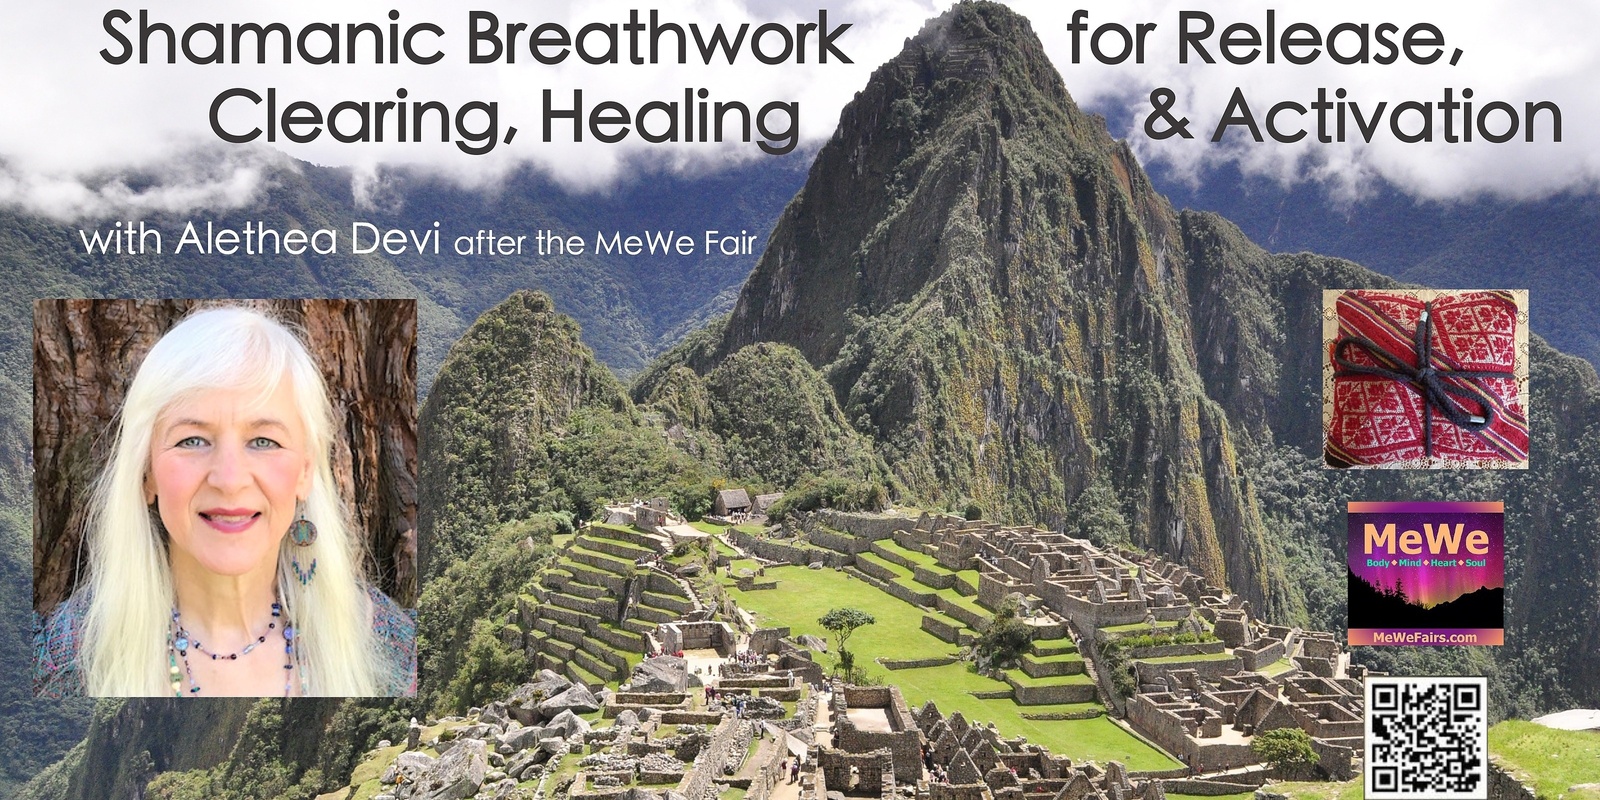 Banner image for Shamanic Breathwork for Release, Clearing, Healing & Activation with Alethea Devi in Portland after the MeWe Fair